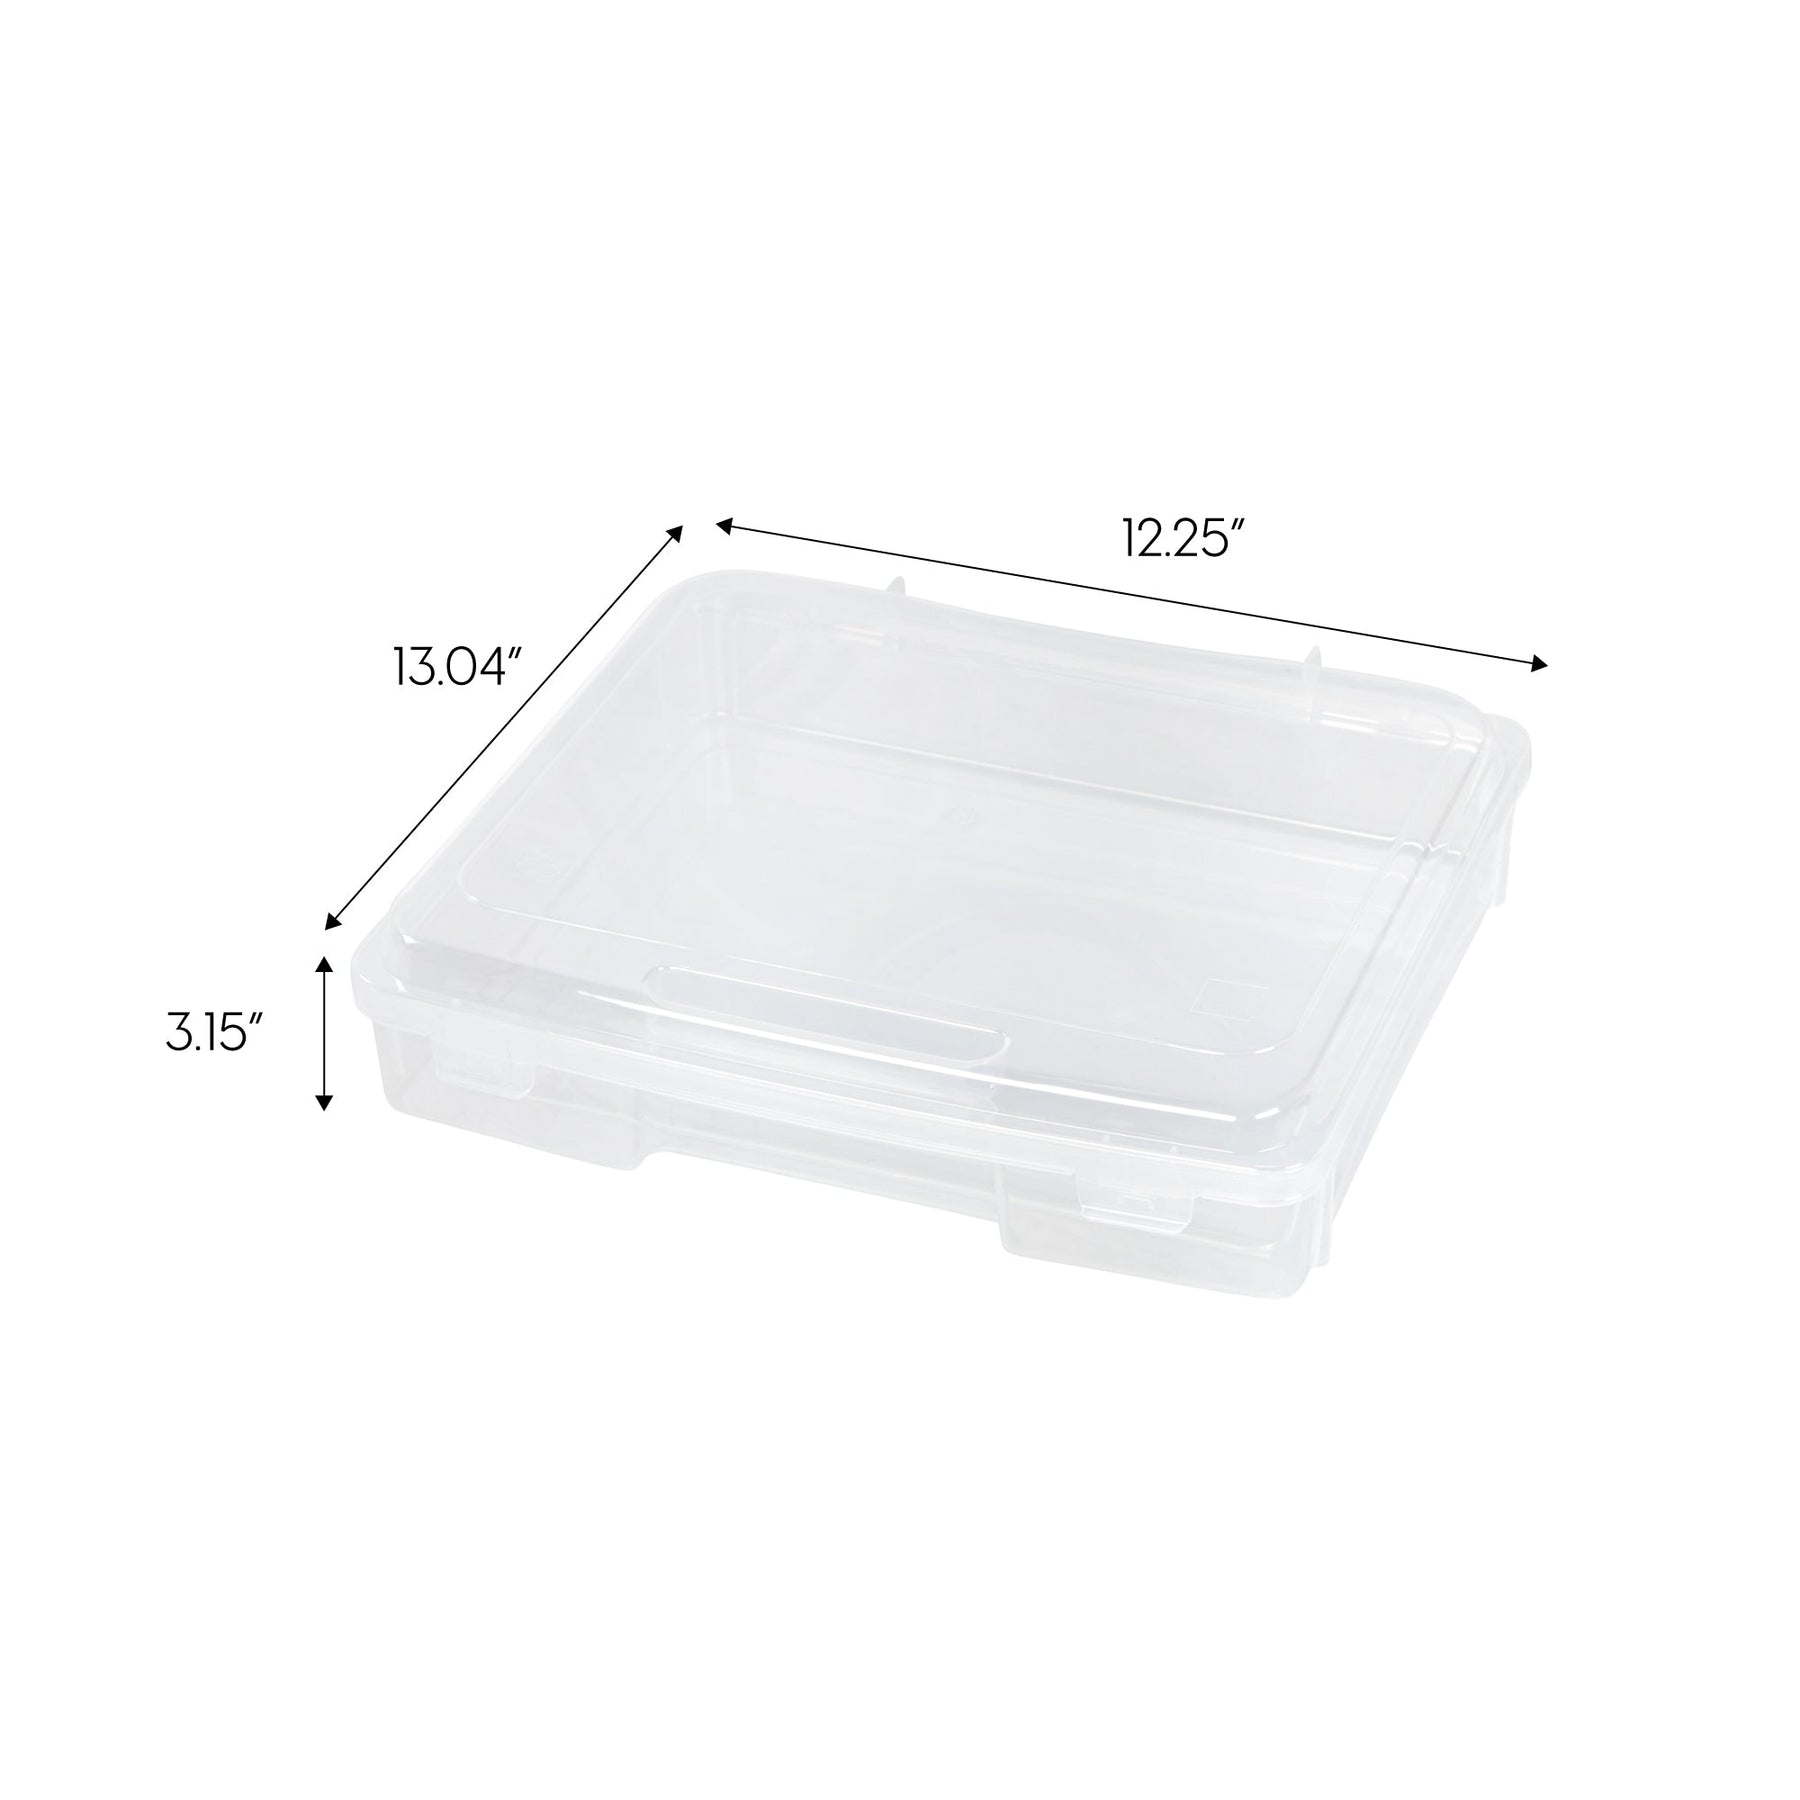 Portable Project Case, 6 Pack, Clear